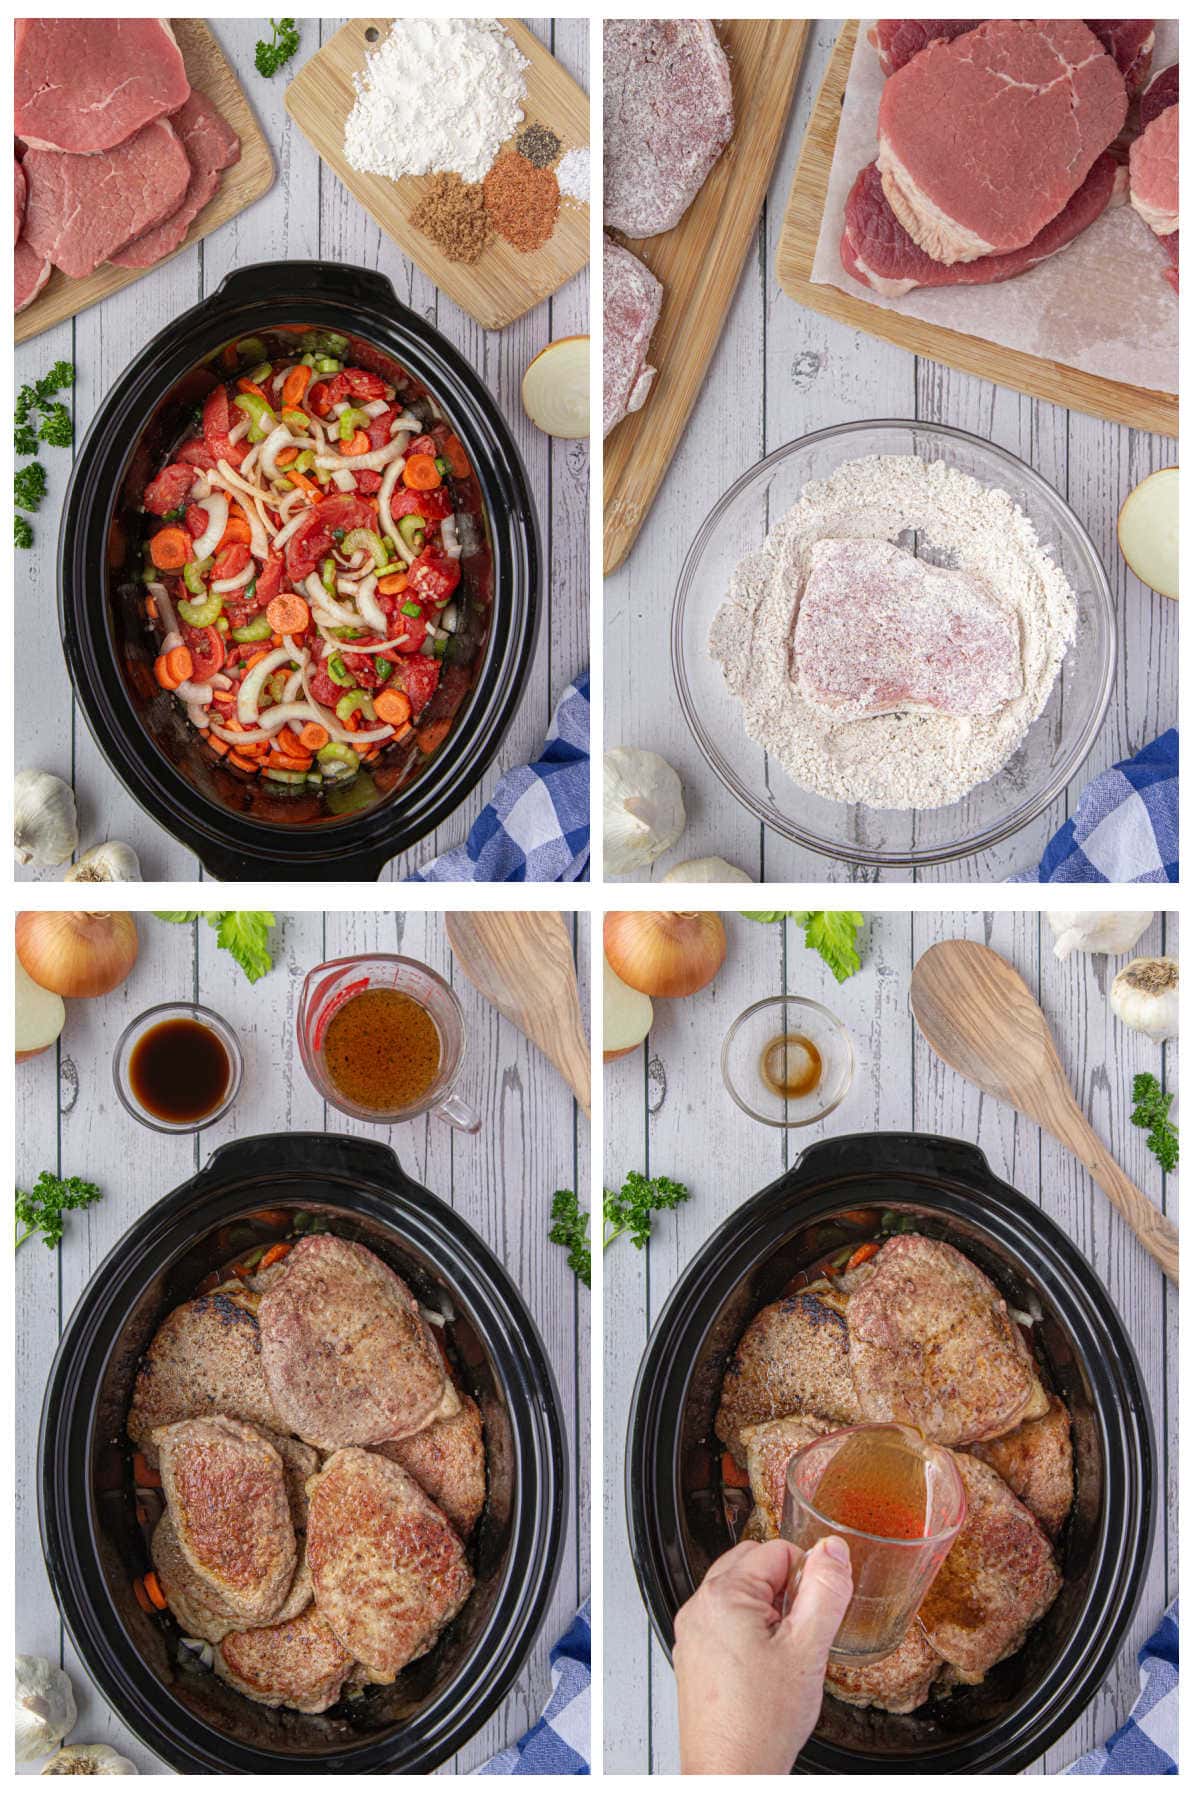 Step by step images showing how to make swiss steak.